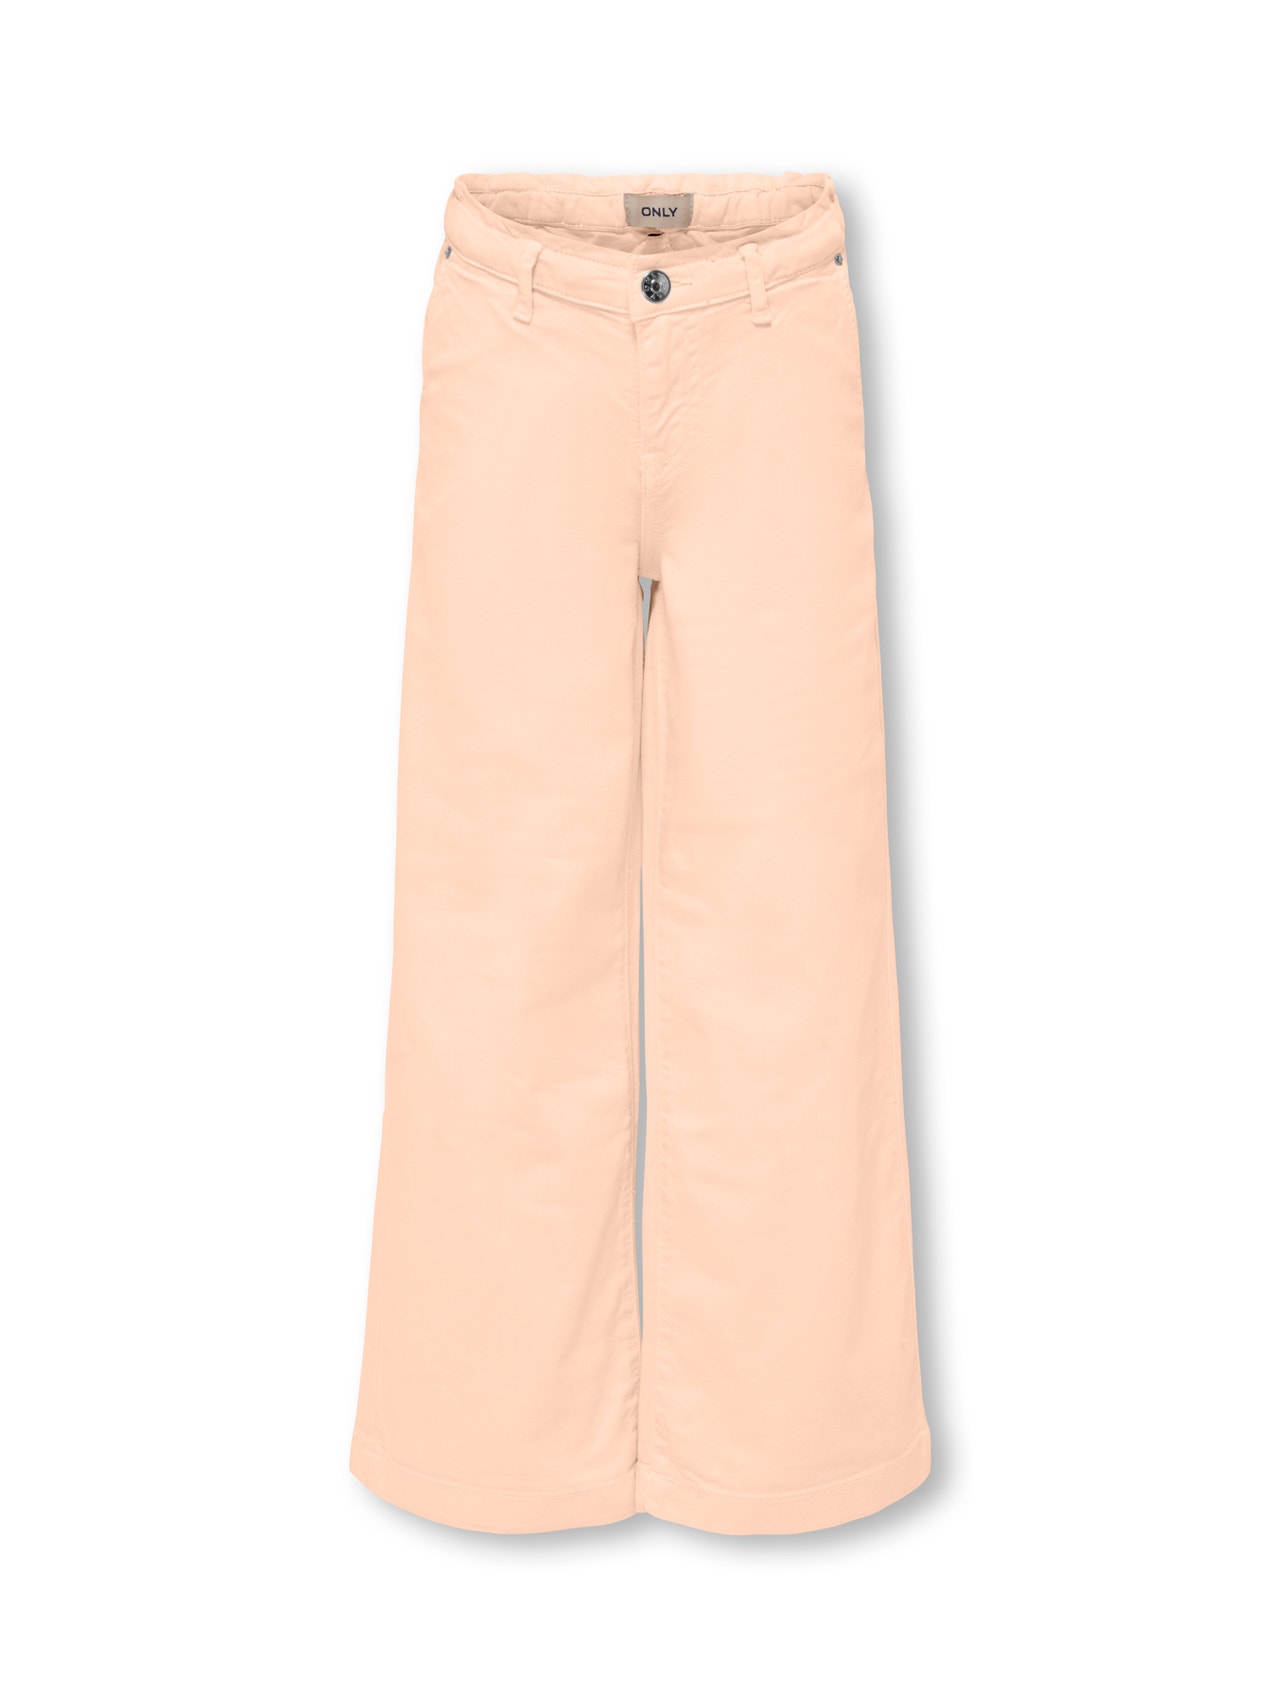 ONLY Cropped Fit Mid waist Trousers -Pale Peach - 15288709